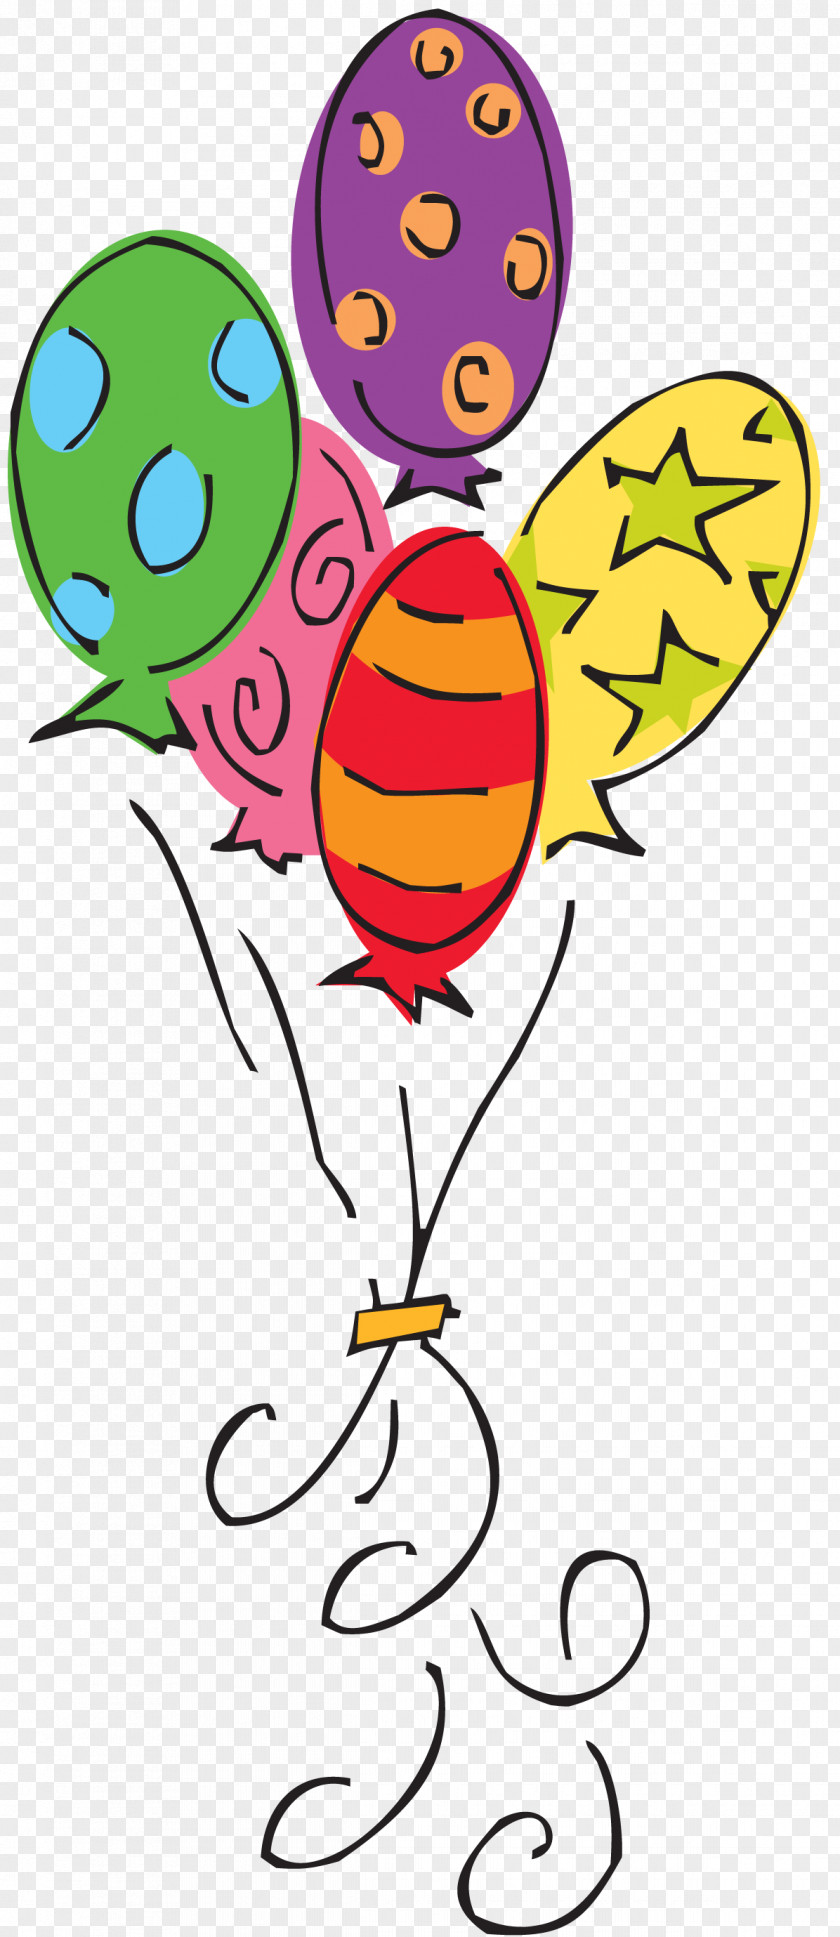 Balloons Toy Balloon Birthday Holiday Clip Art PNG